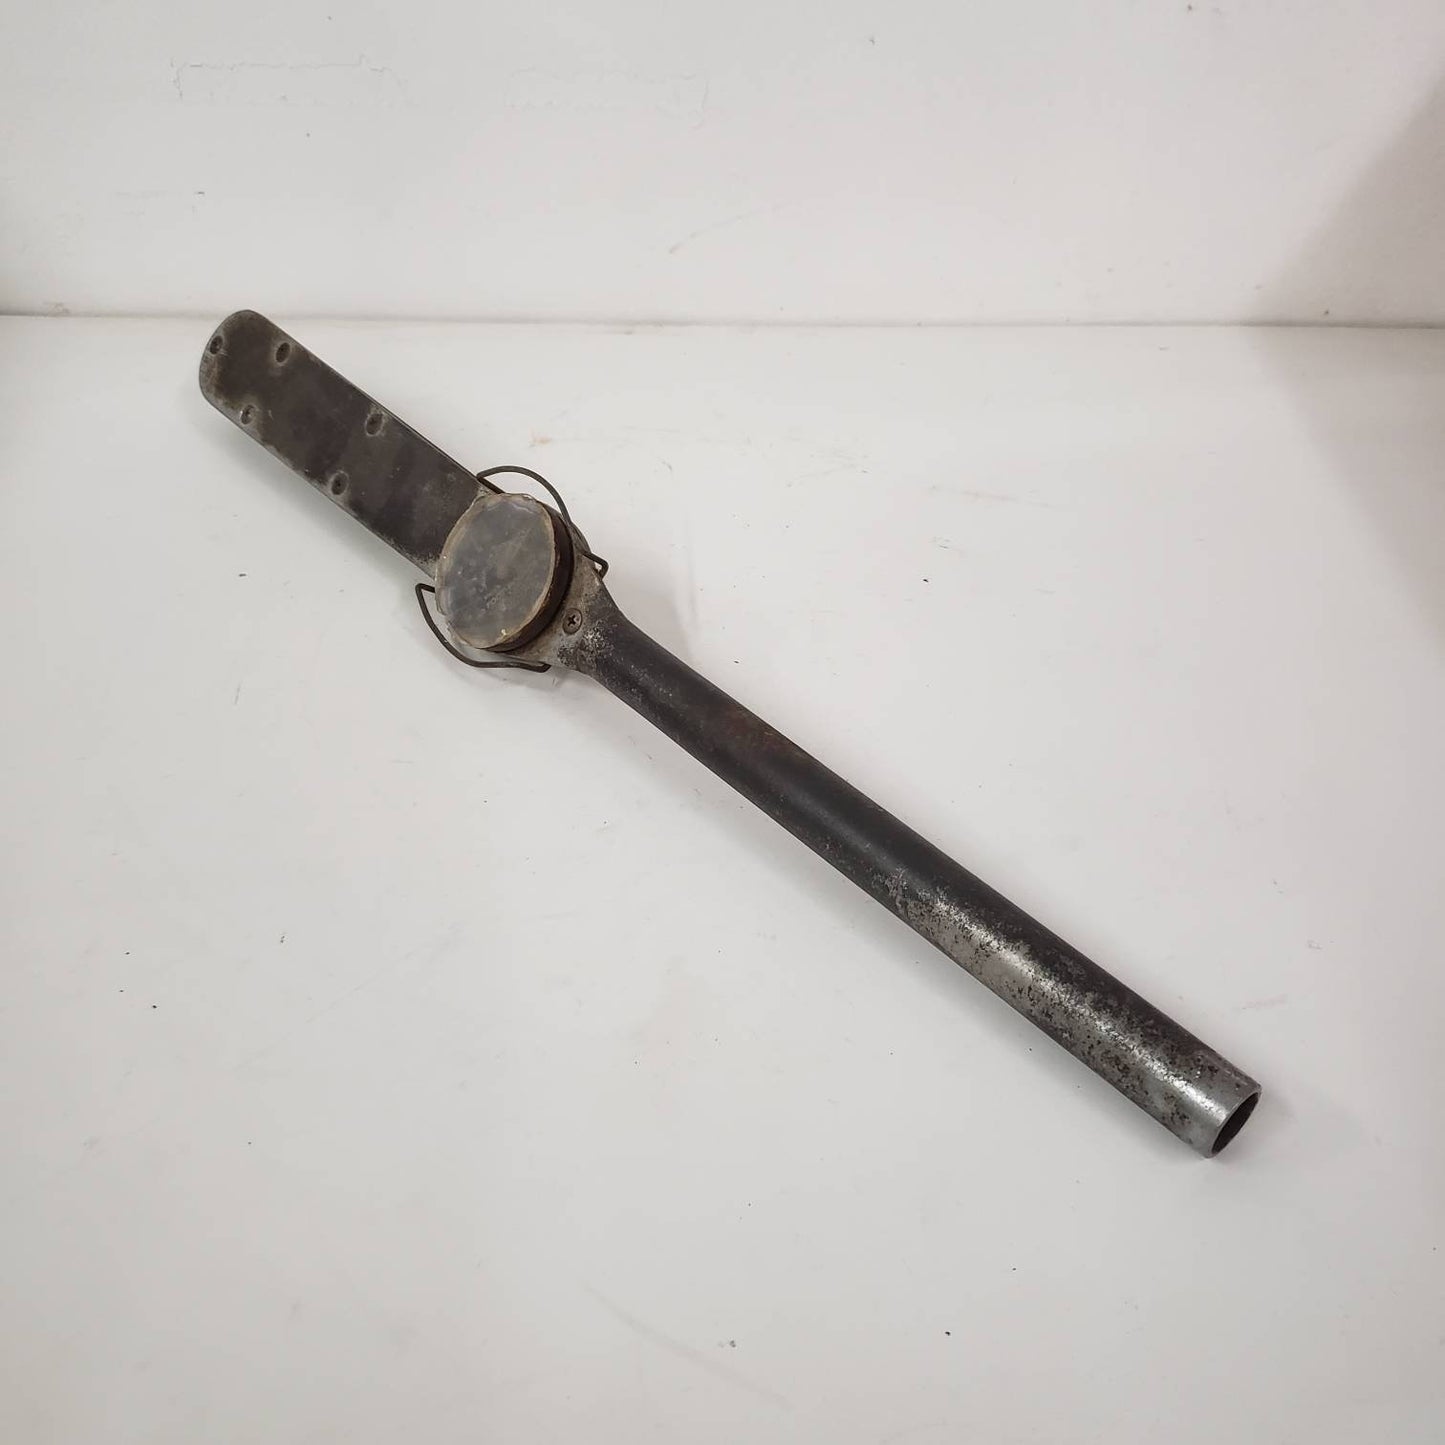 snap-on wrench torque ratchet 225 foot pounds half inch drive